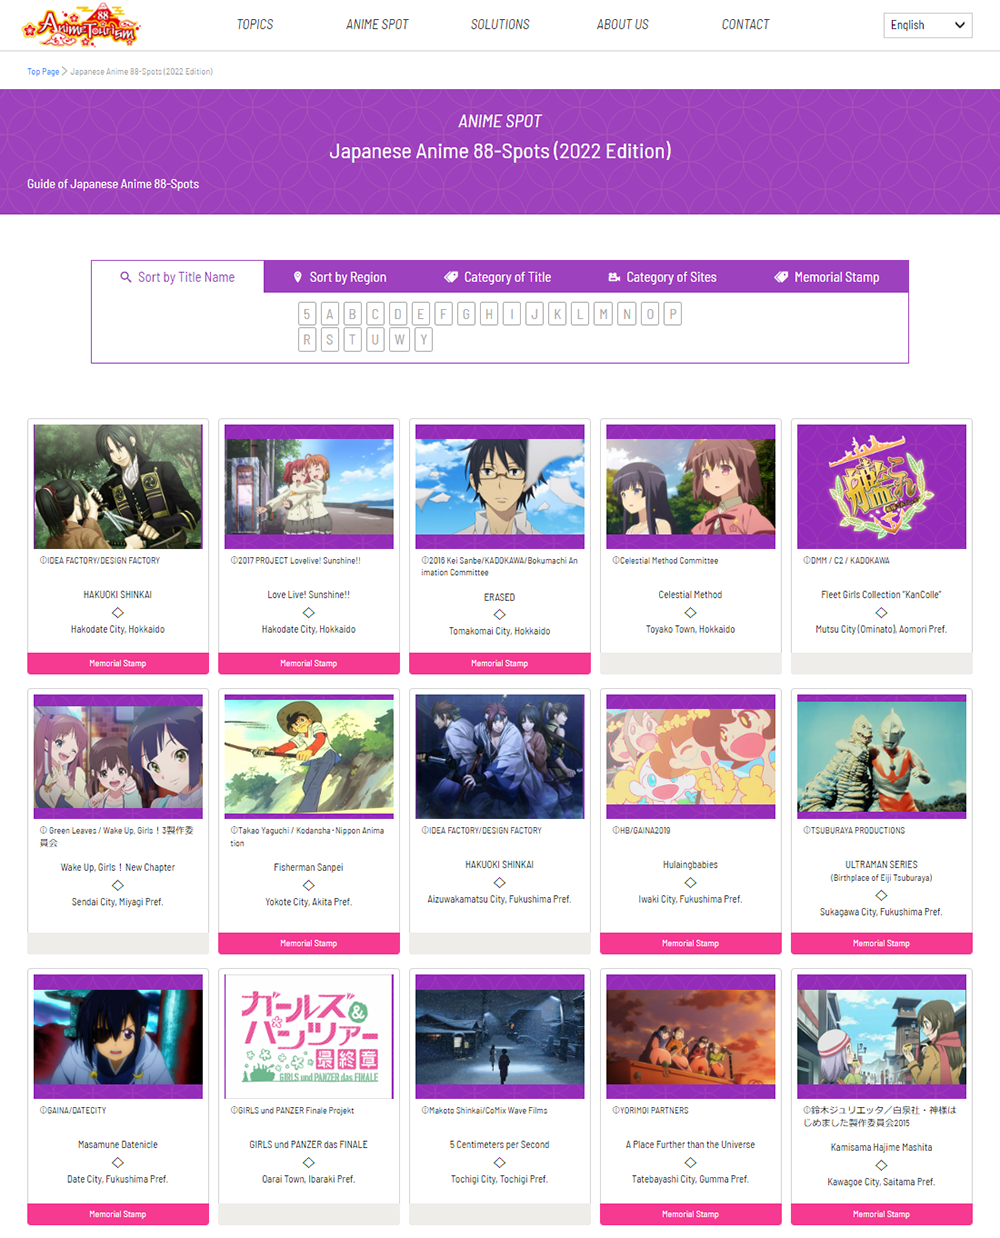 Creating New Tourism Resources in Regions by Promoting “Anime Pilgrimages”  by Anime Fan | INITIATIVES TOWARD SUSTAINABILITY | KADOKAWA GROUP GLOBAL  PORTAL SITE